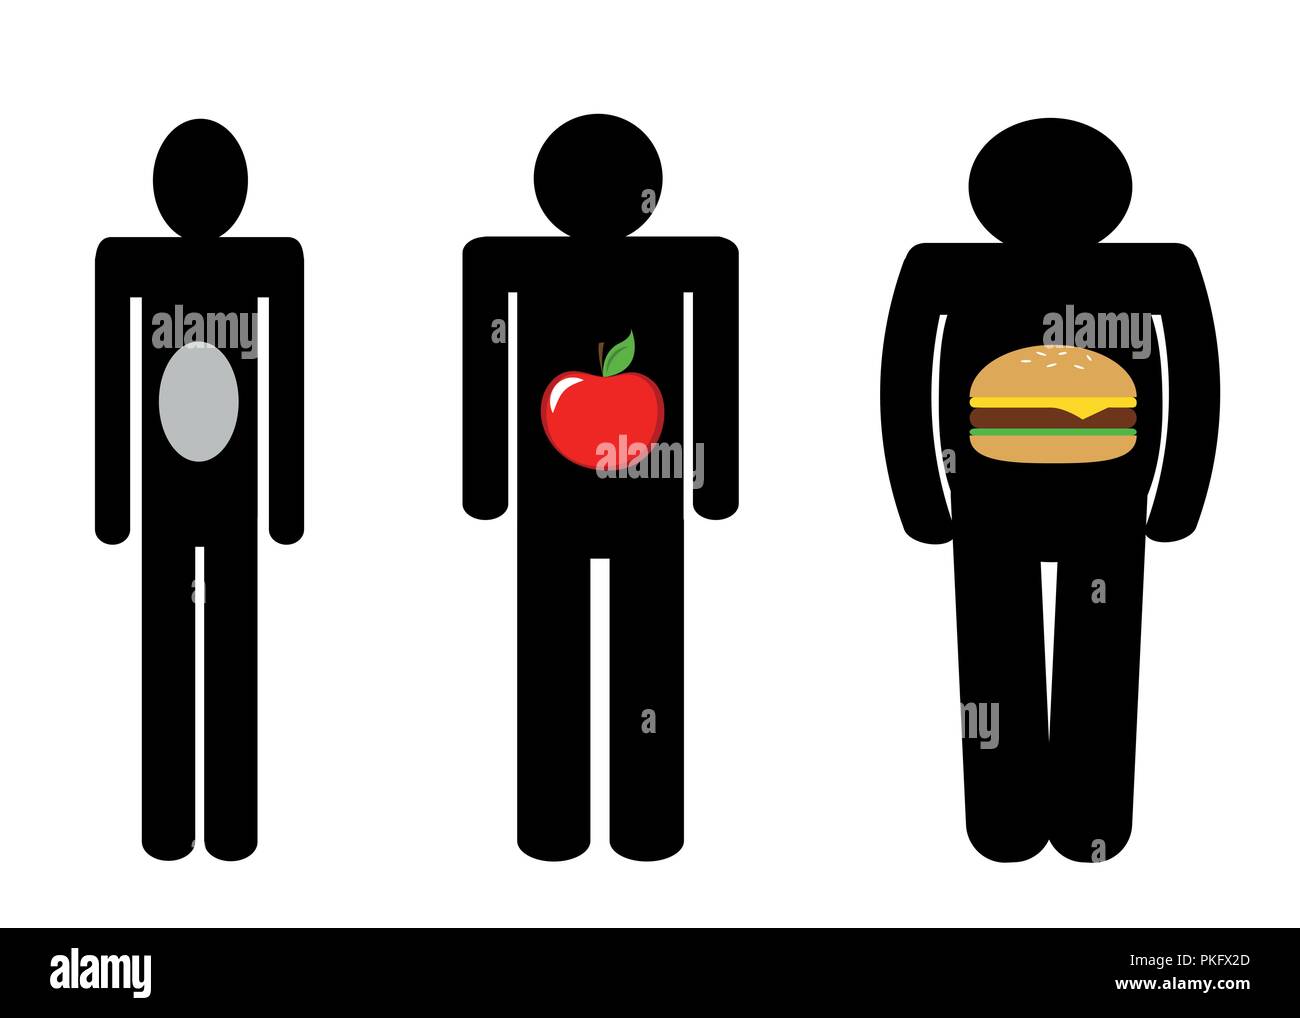 underweight normal weight overweight icons apple burger man pictogram vector illustration EPS10 Stock Vector